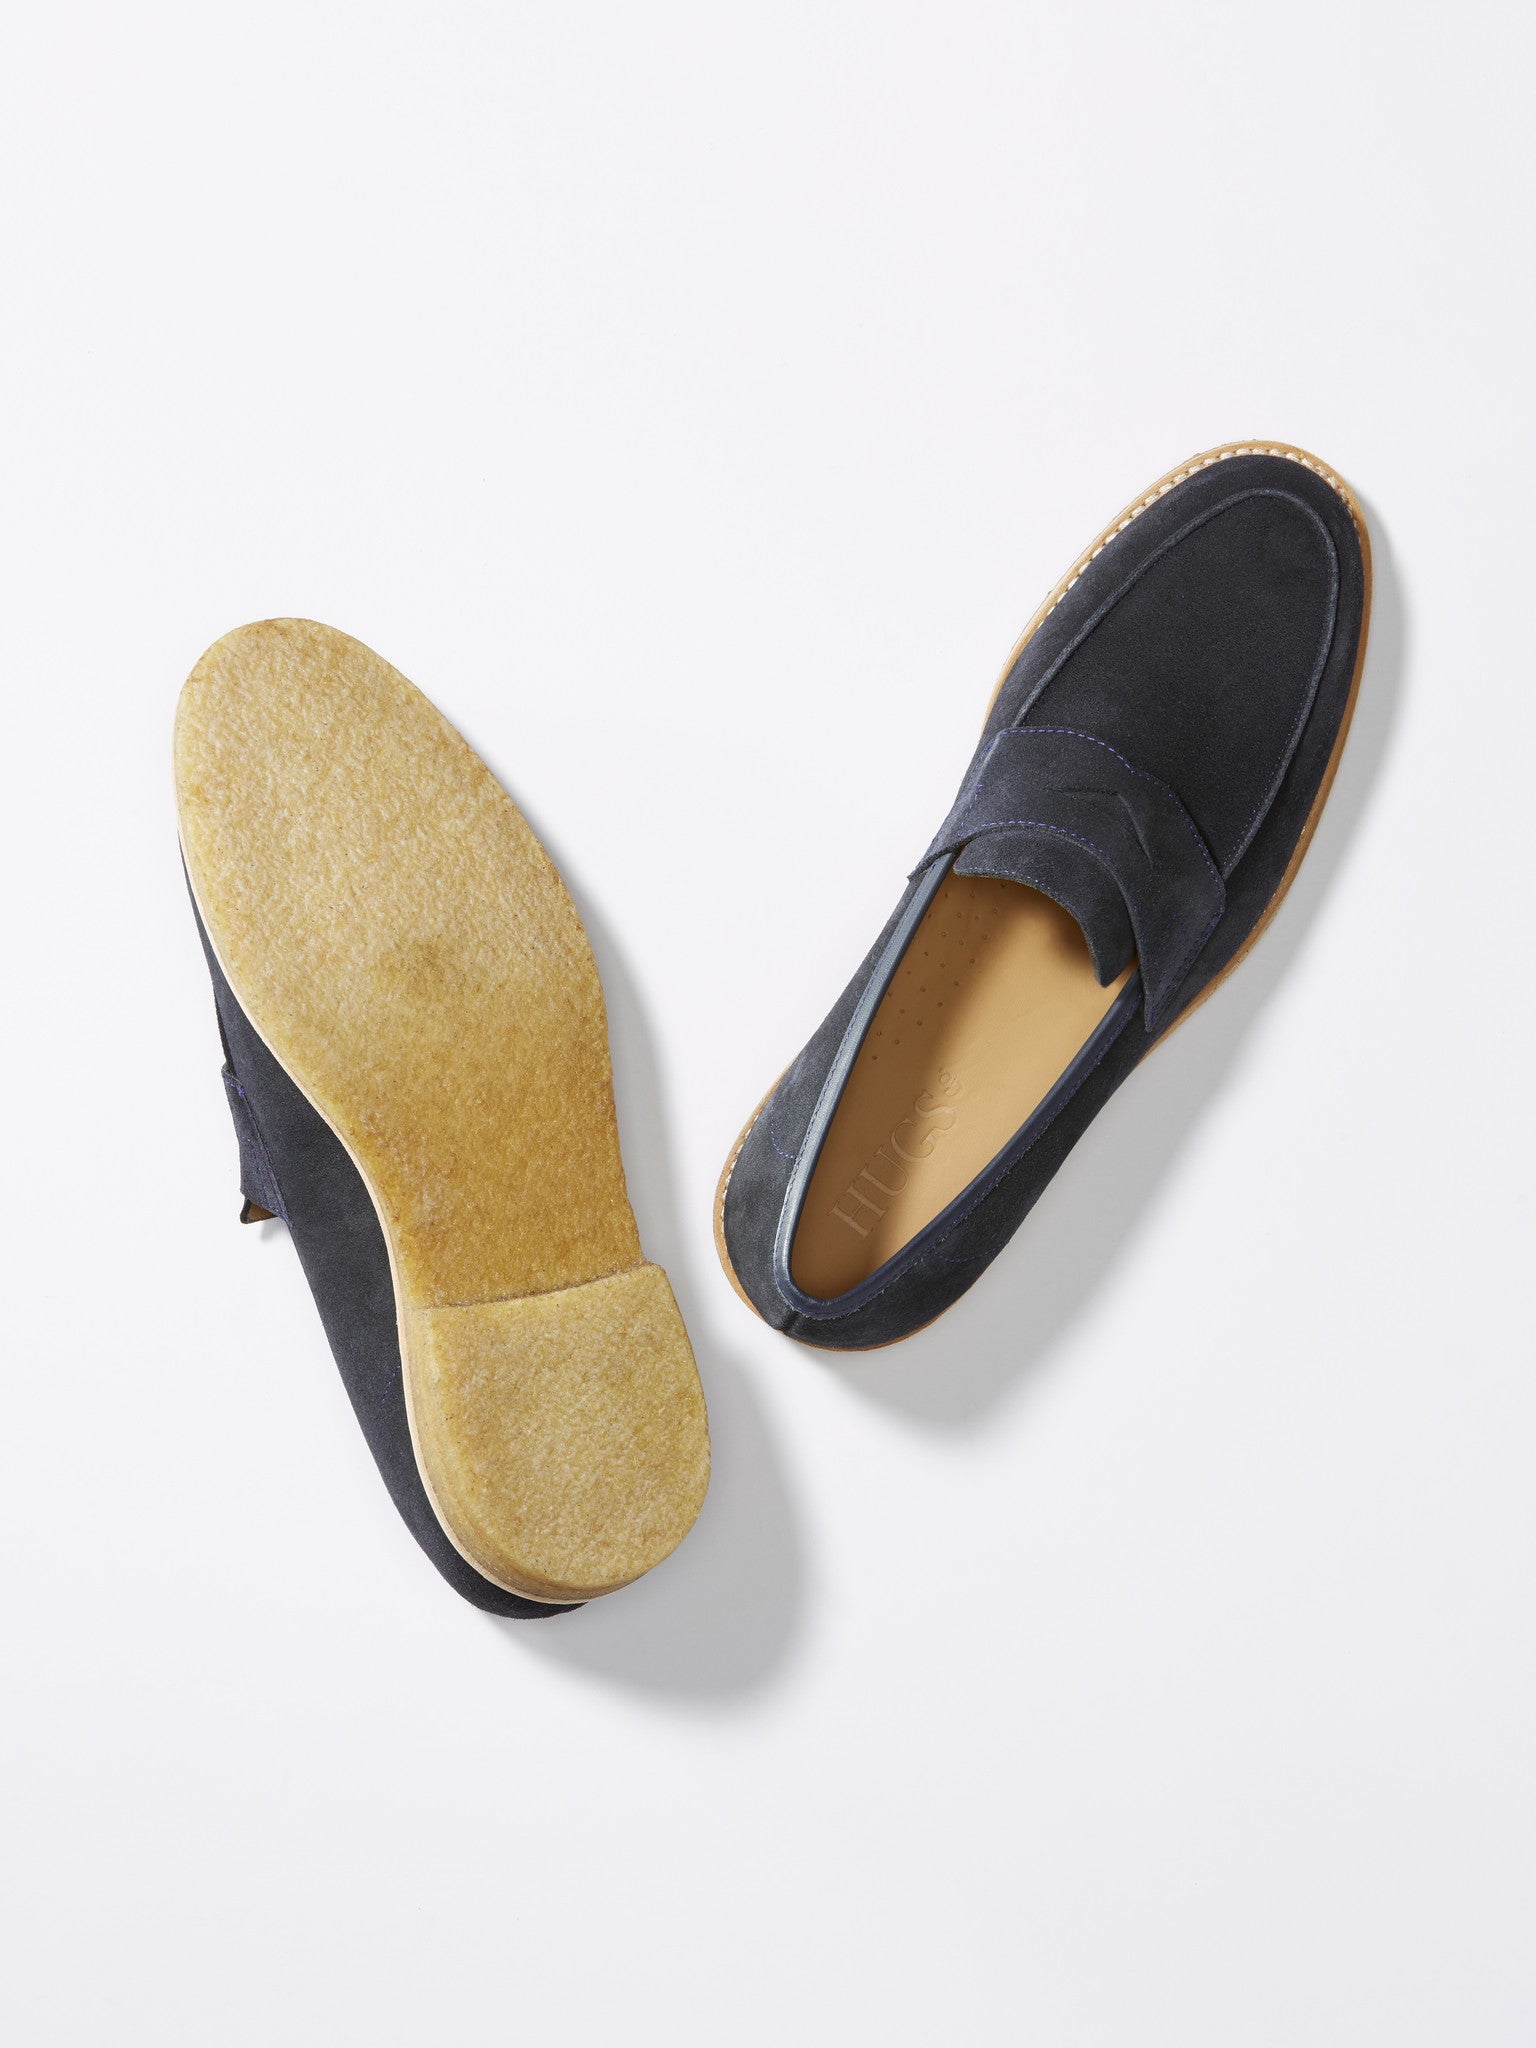 mens loafers with rubber soles